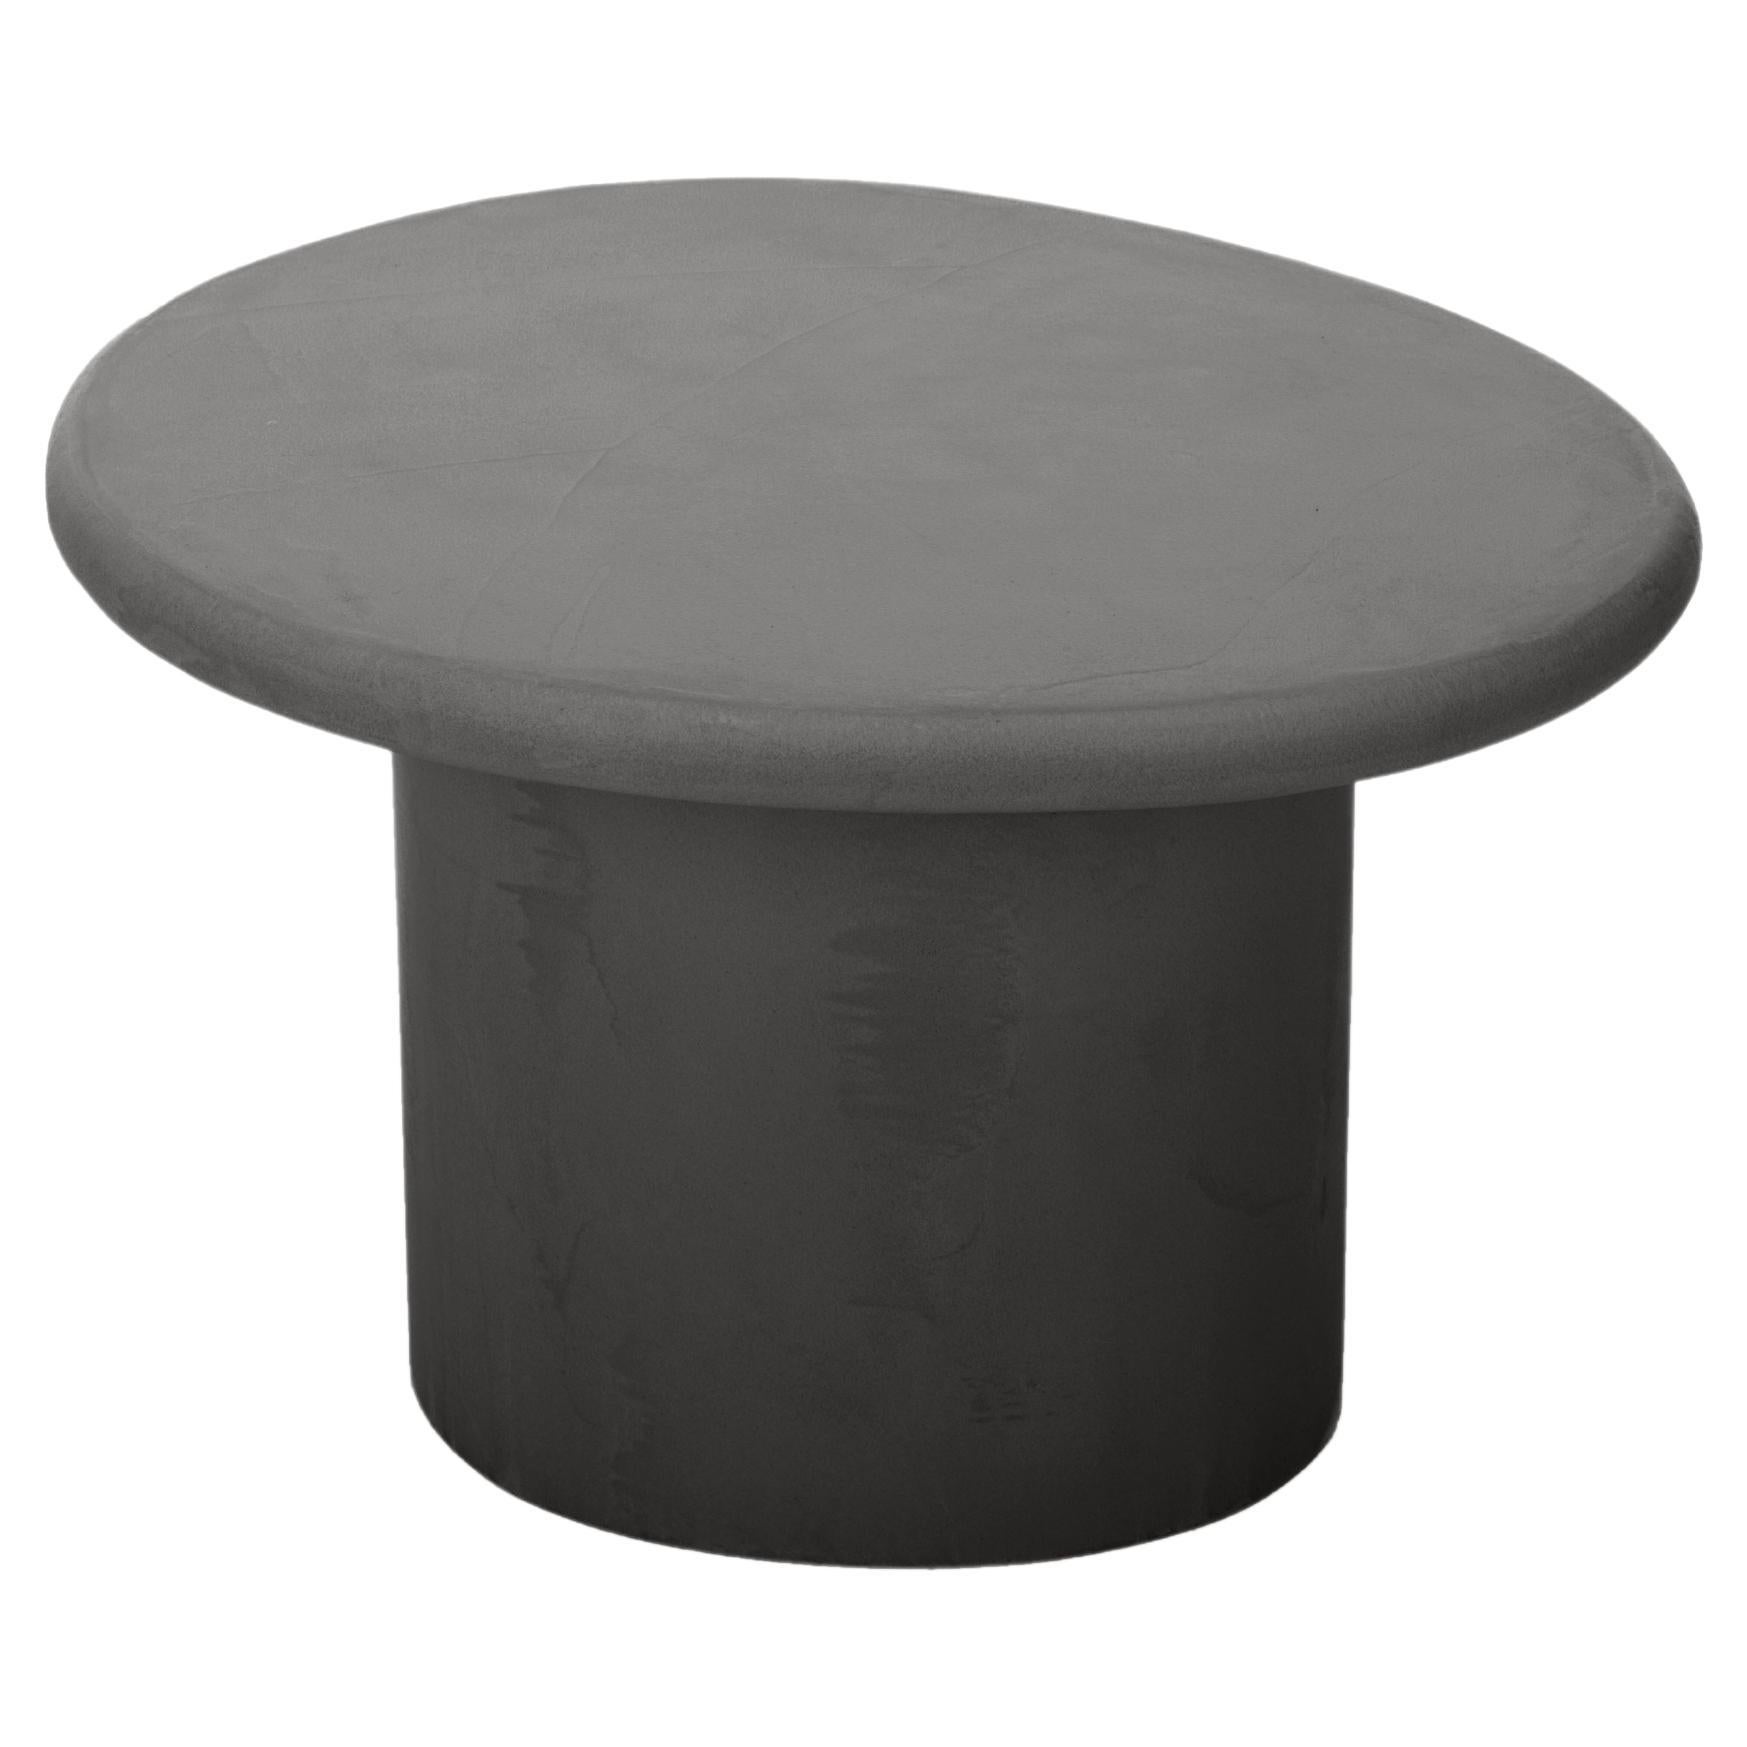 Organic Shaped Mortex Coffee Table "Sami 01" BM57 by Isabelle Beaumont For Sale